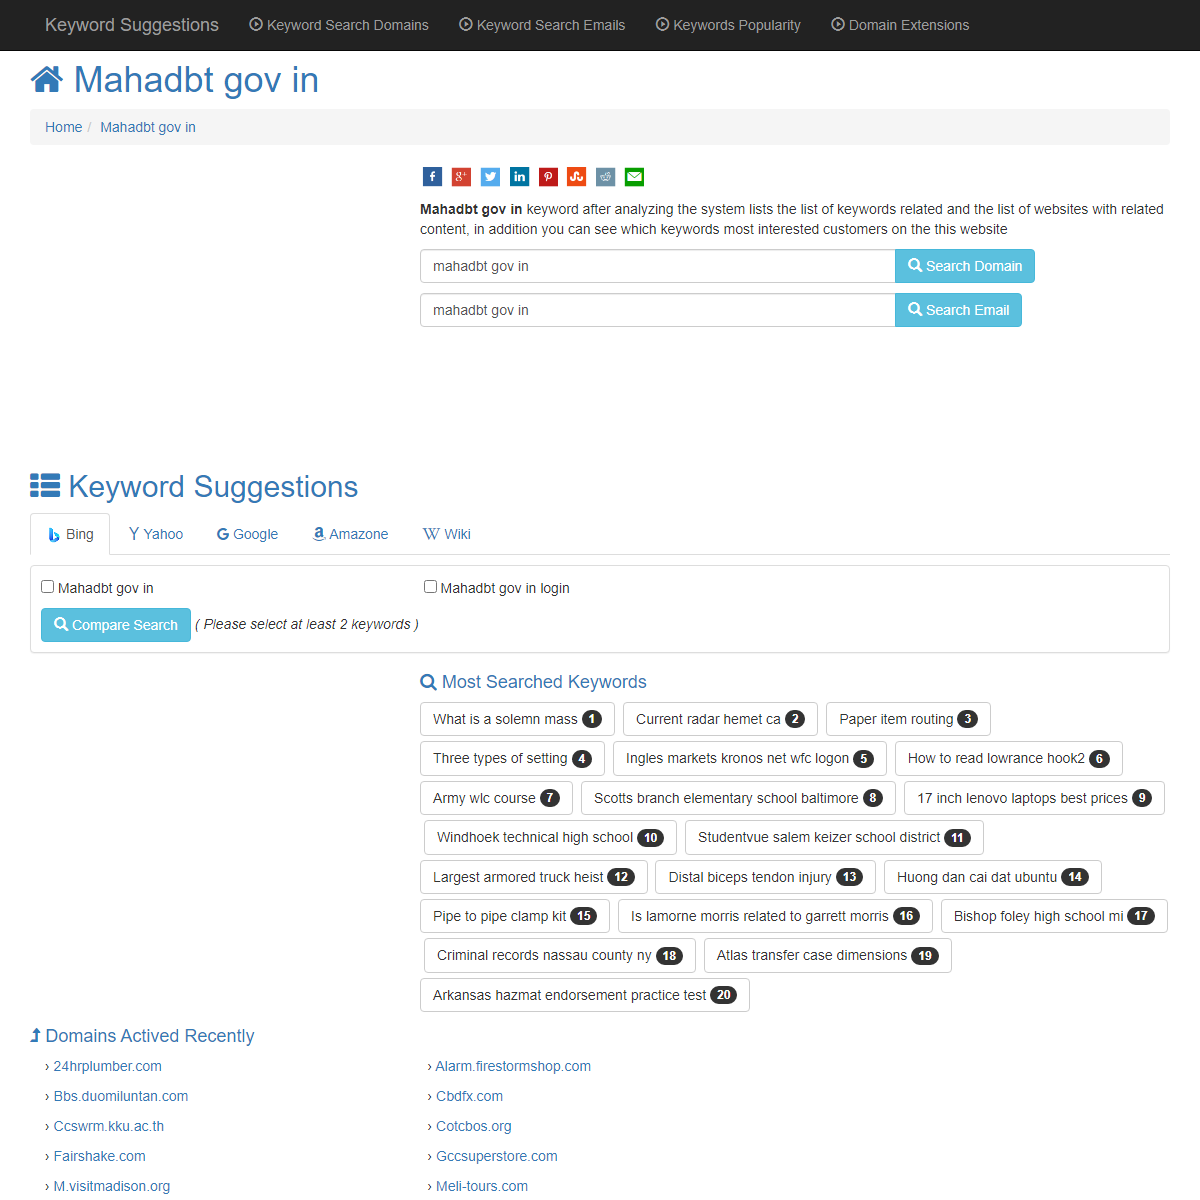 A complete backup of https://www.keyword-suggest-tool.com/search/mahadbt+gov+in/